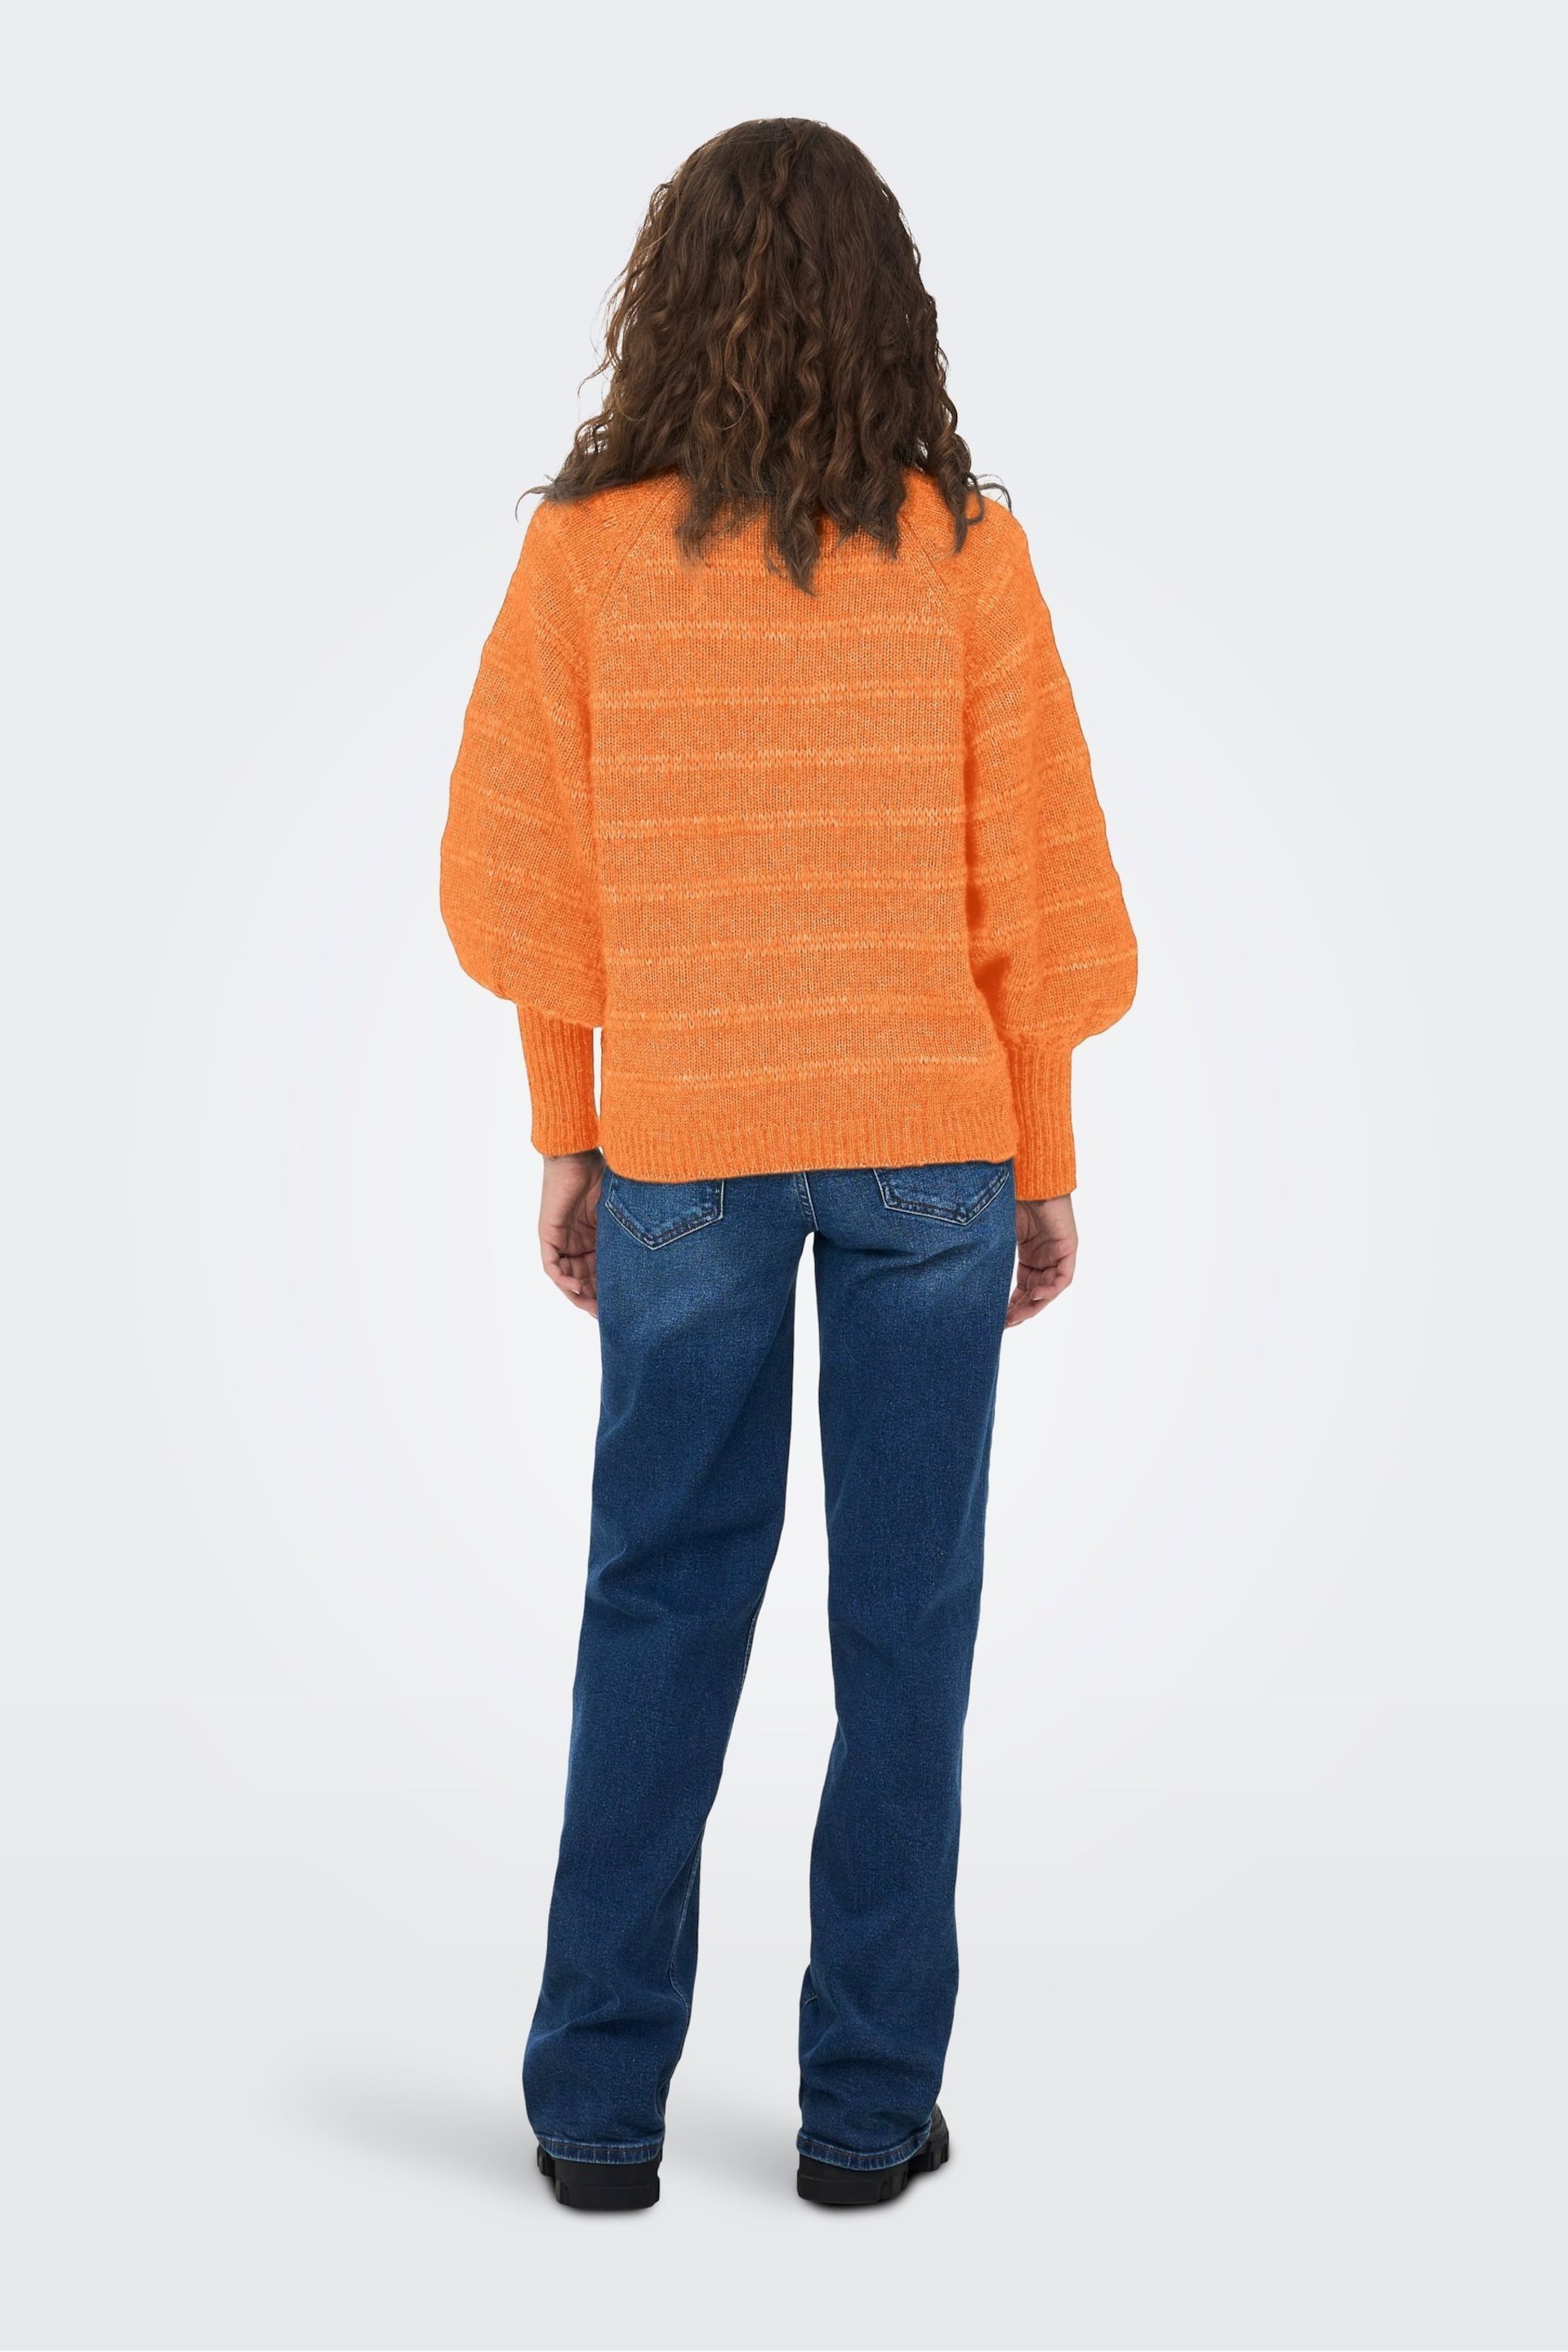 ONLY Orange High Neck Knitted Ribbed Puff Sleeve Jumper - Image 2 of 3